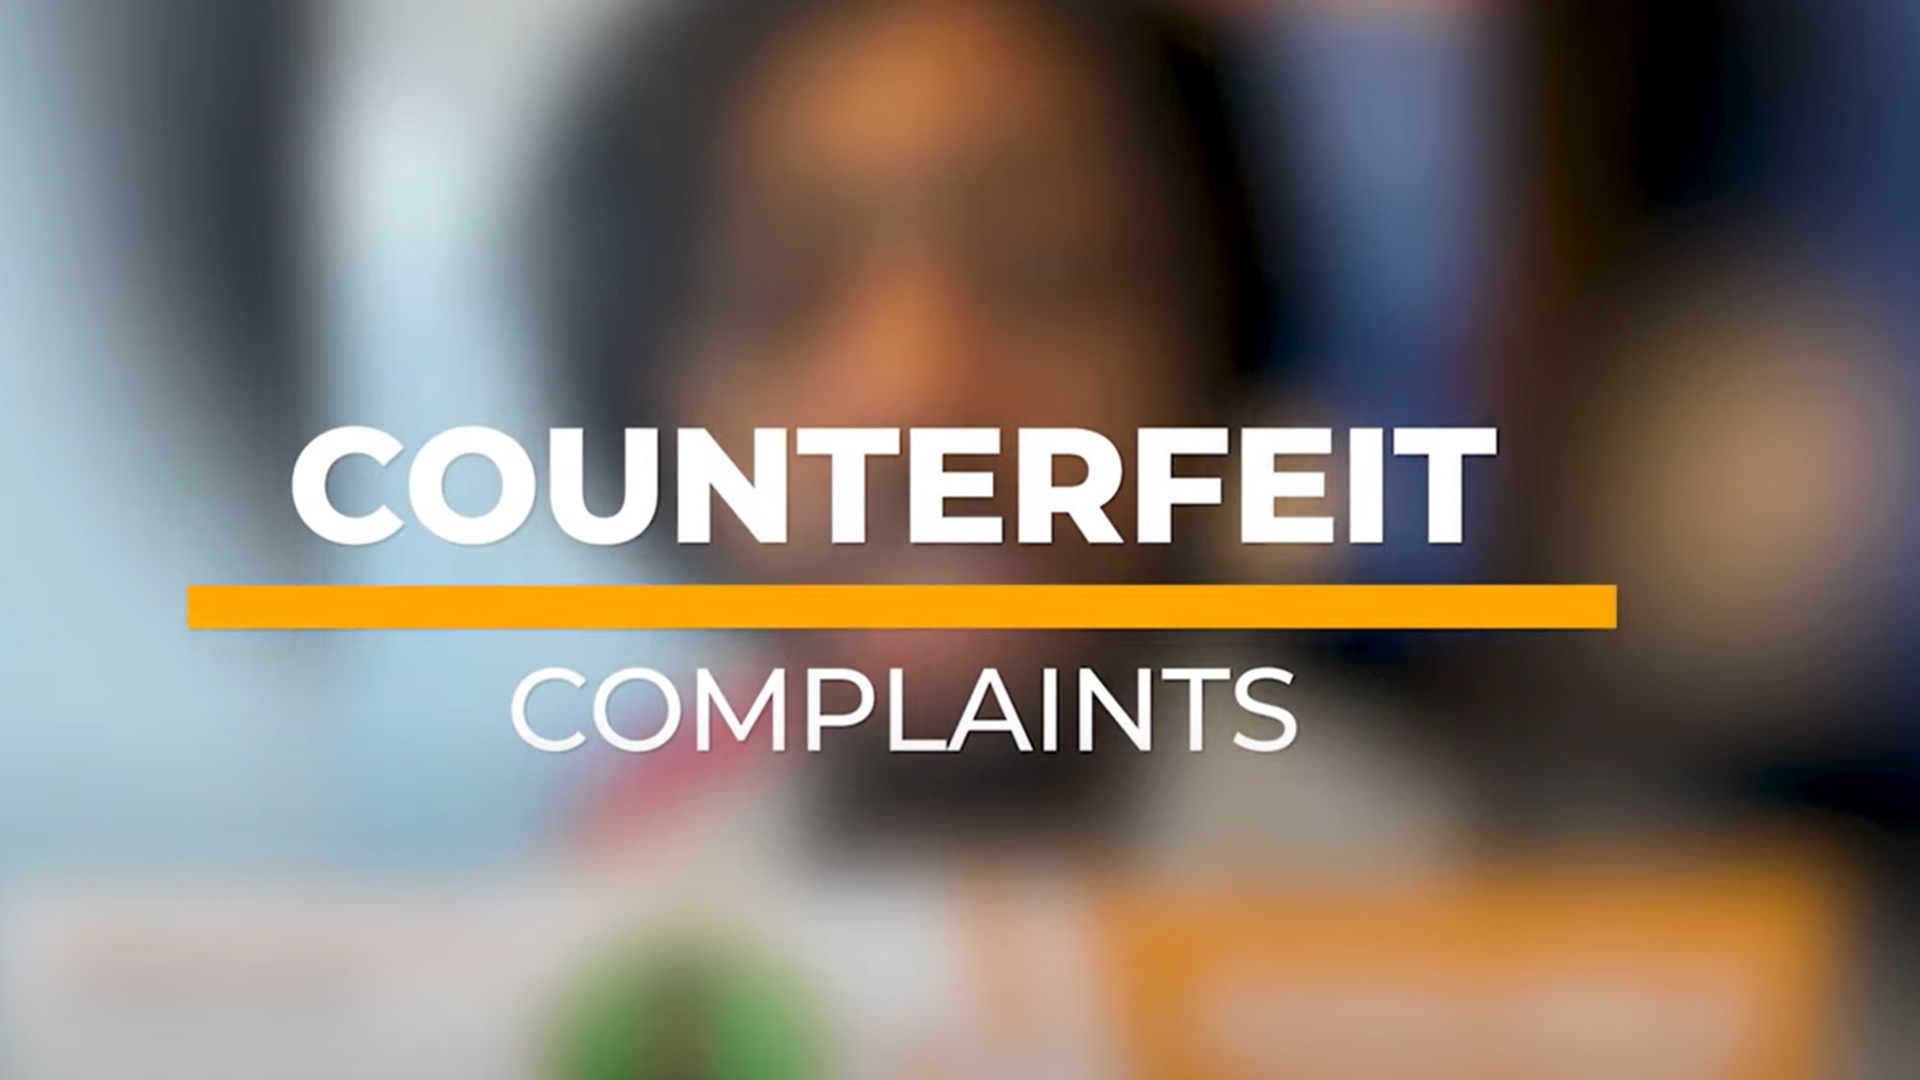 Counterfeit Complaints when Listing Generic Products on Branded Listings on Amazon